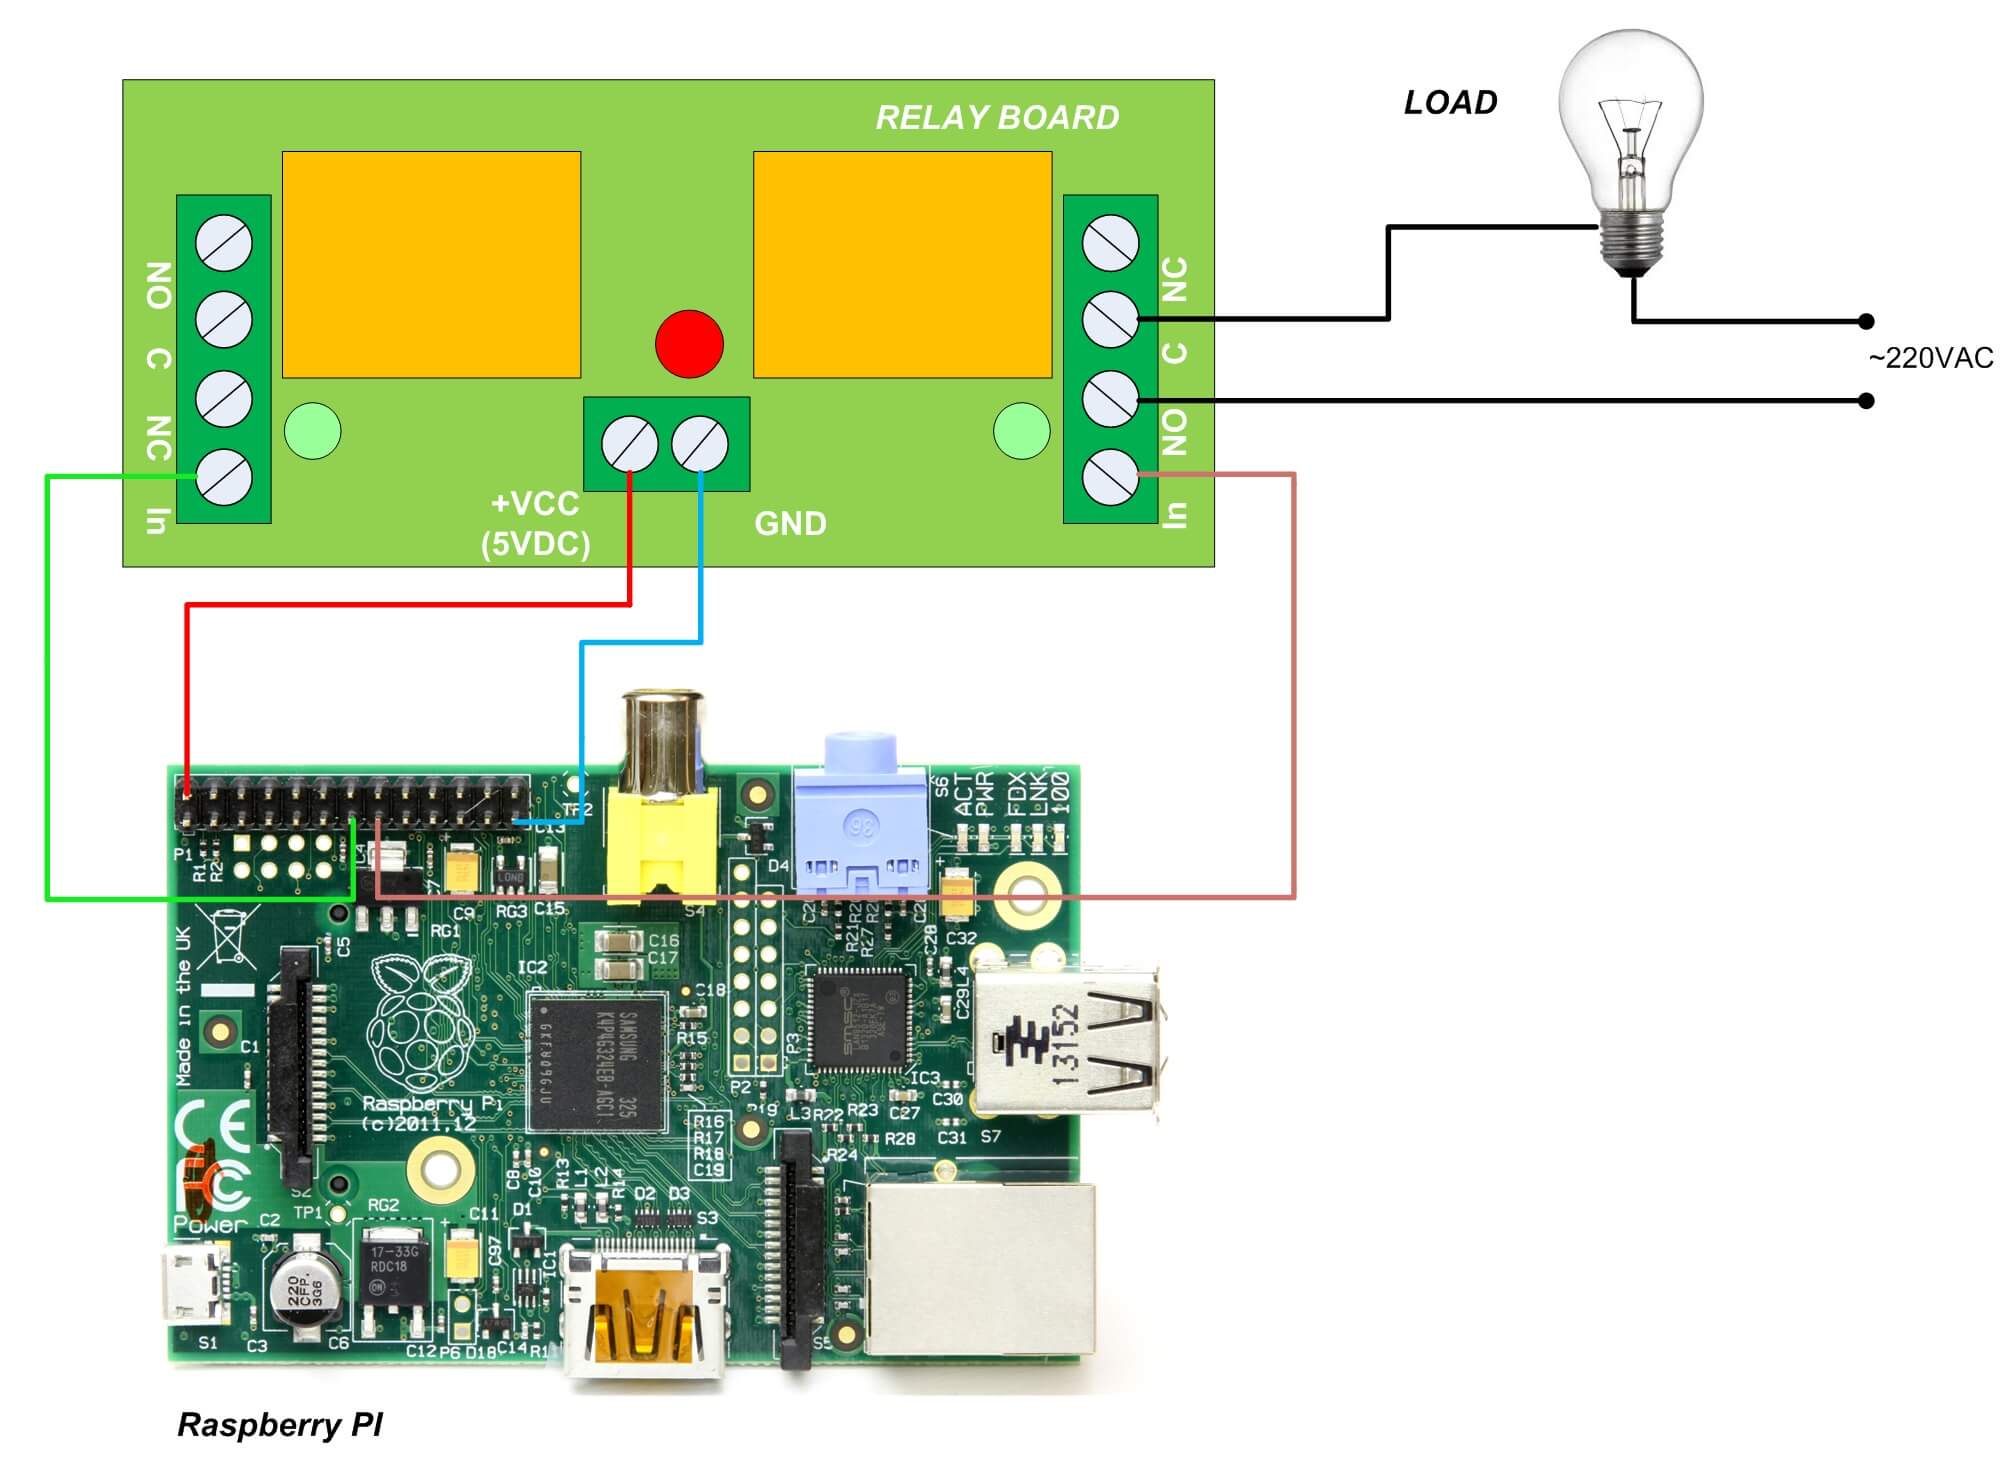 relay board connected to Raspberry PI